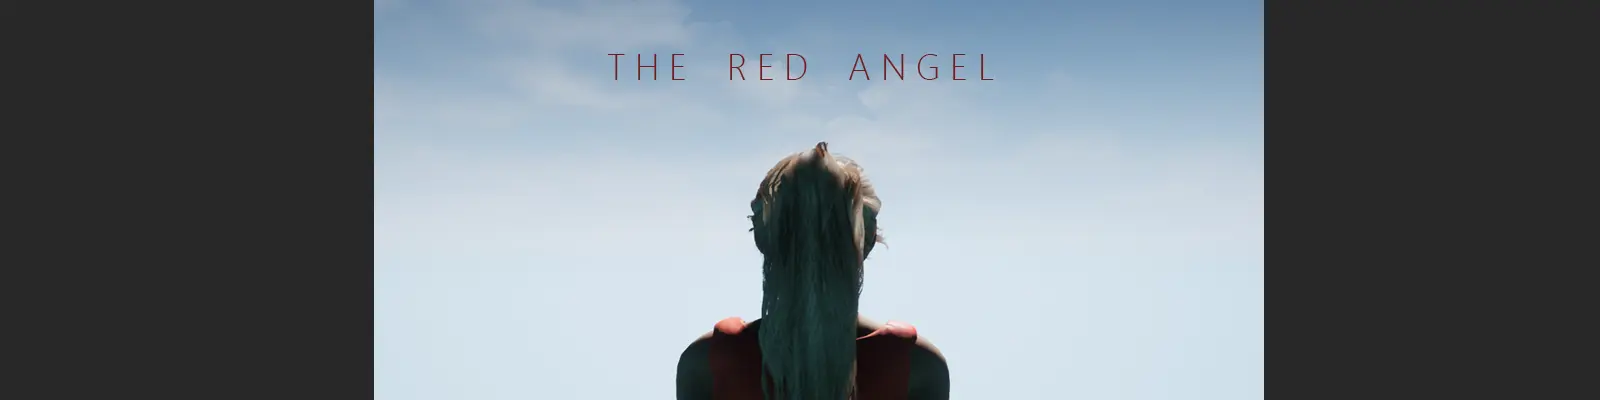 The Red Angel [v0.2.0.3] main image